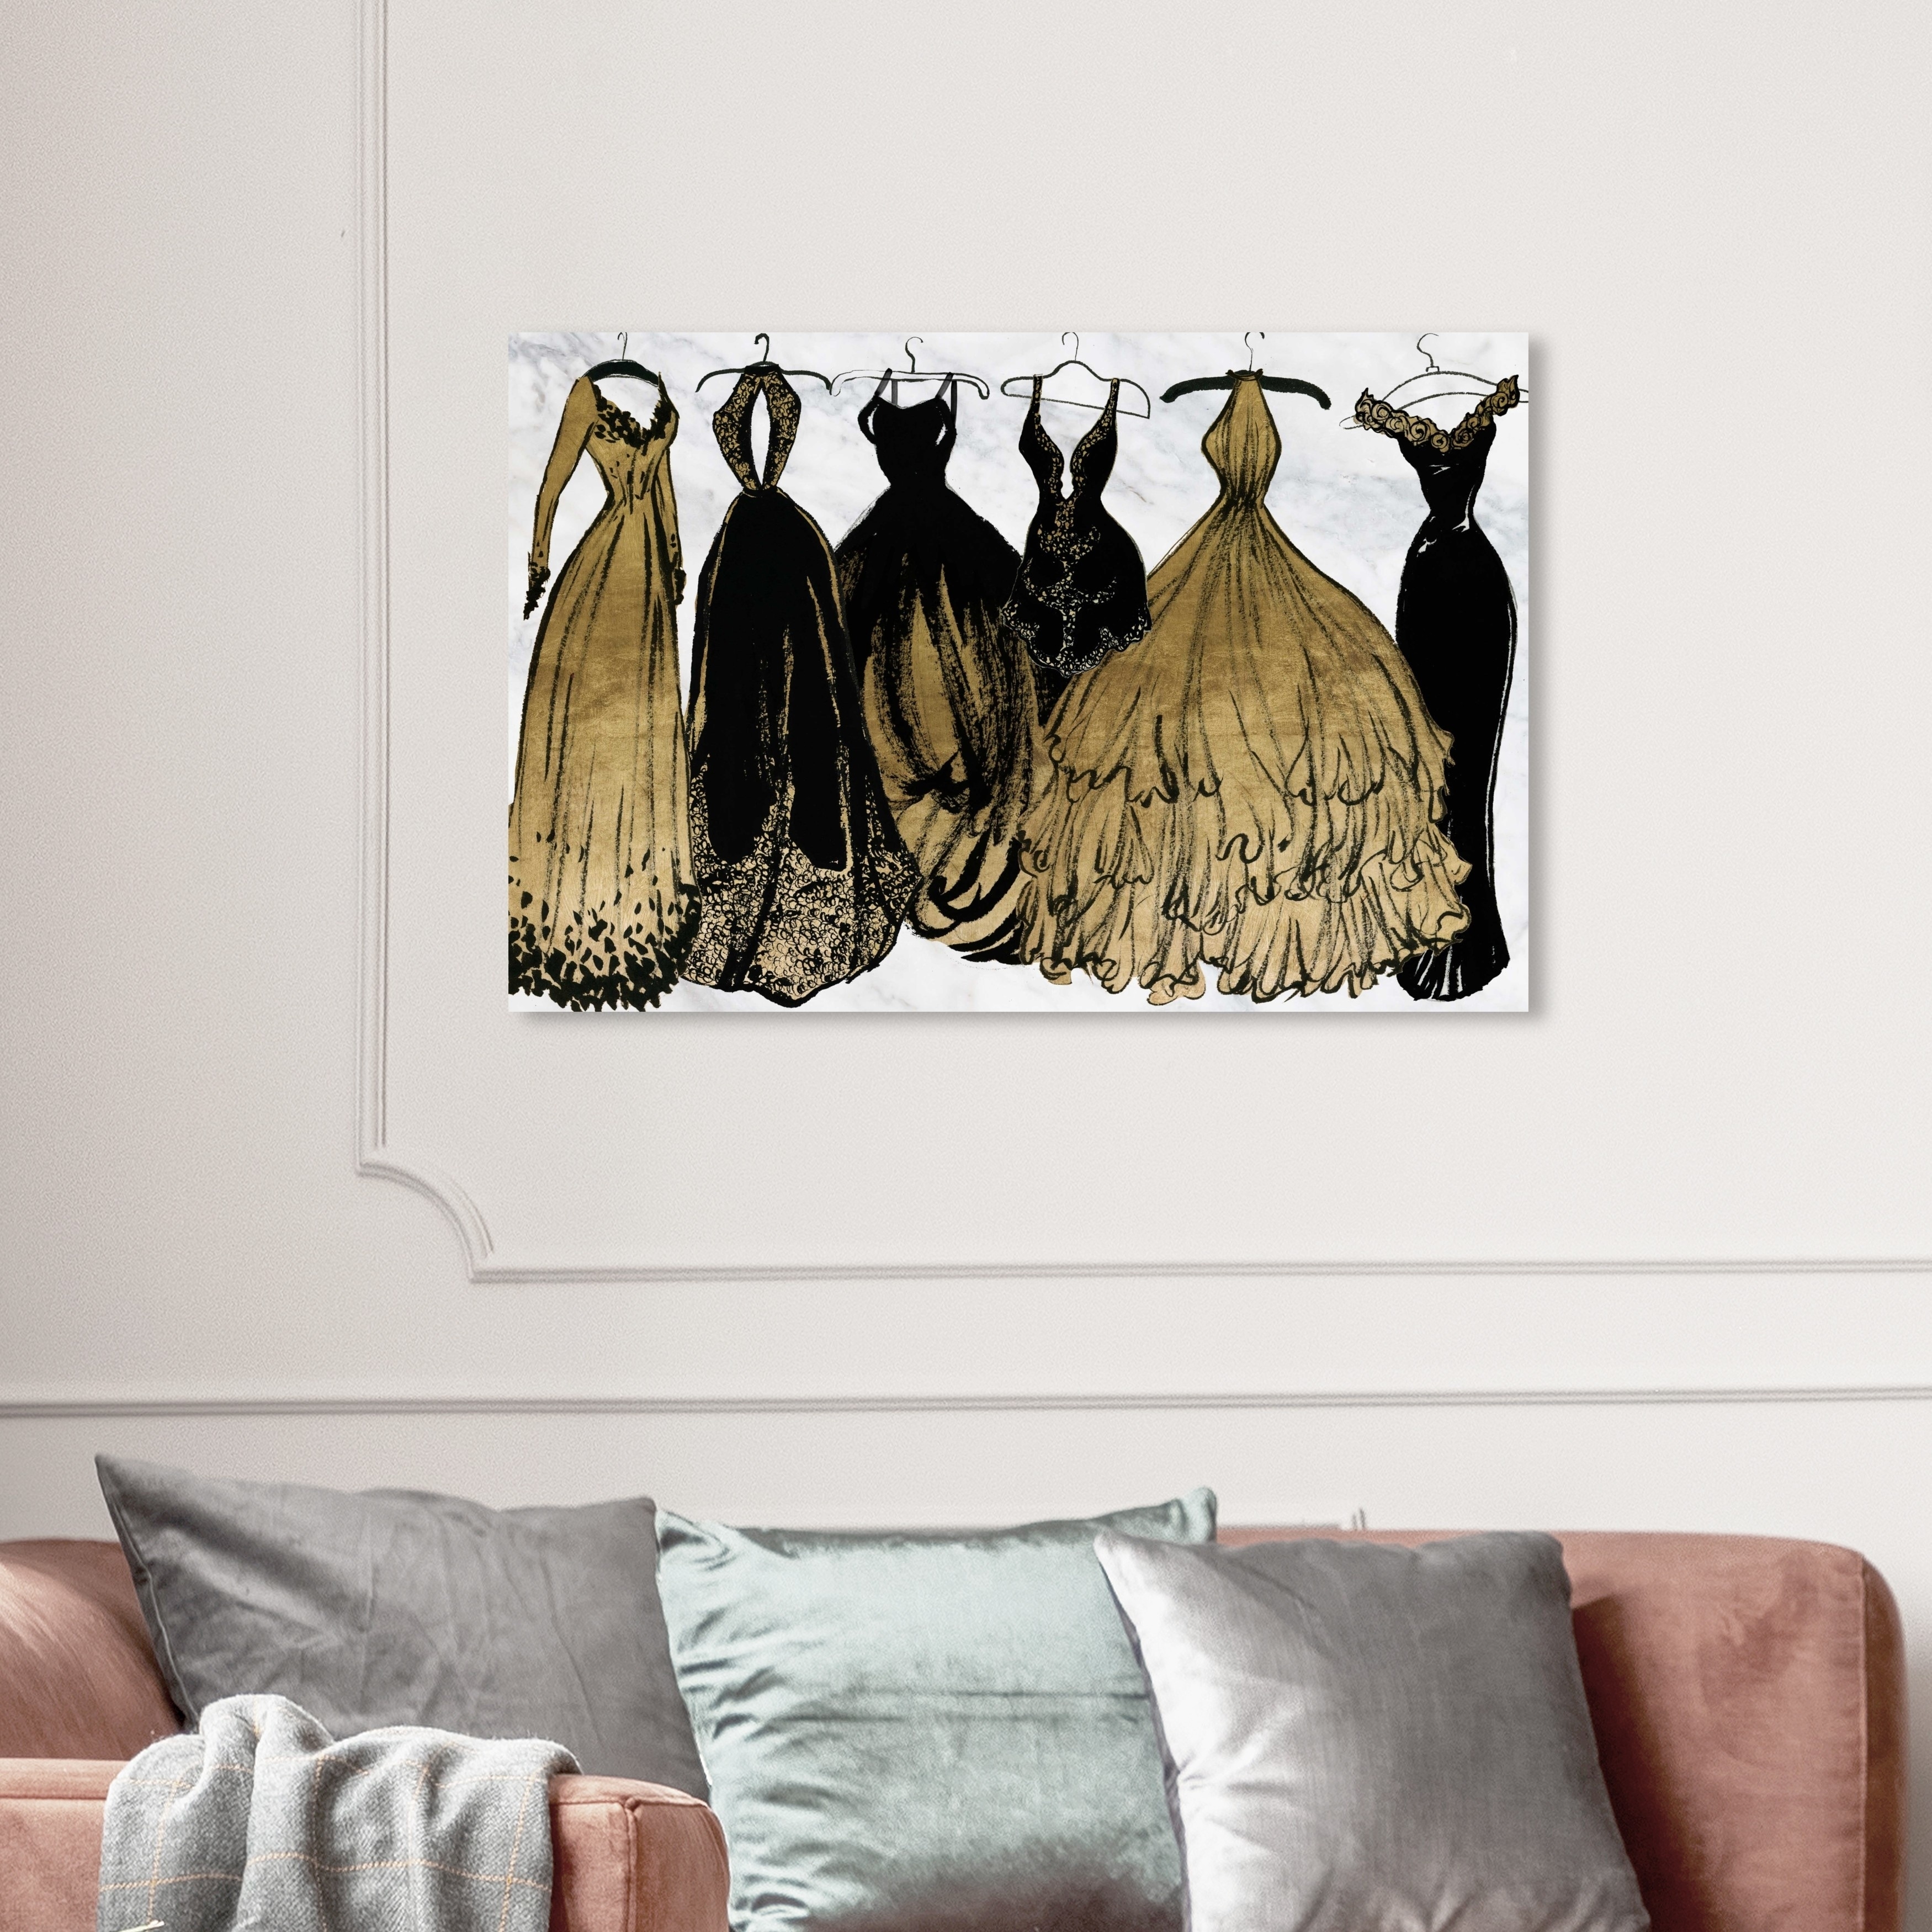 Oliver Gal 'Balloon Girl Blue' Fashion and Glam Wall Art Canvas Print -  Black, Gold - Bed Bath & Beyond - 28596307